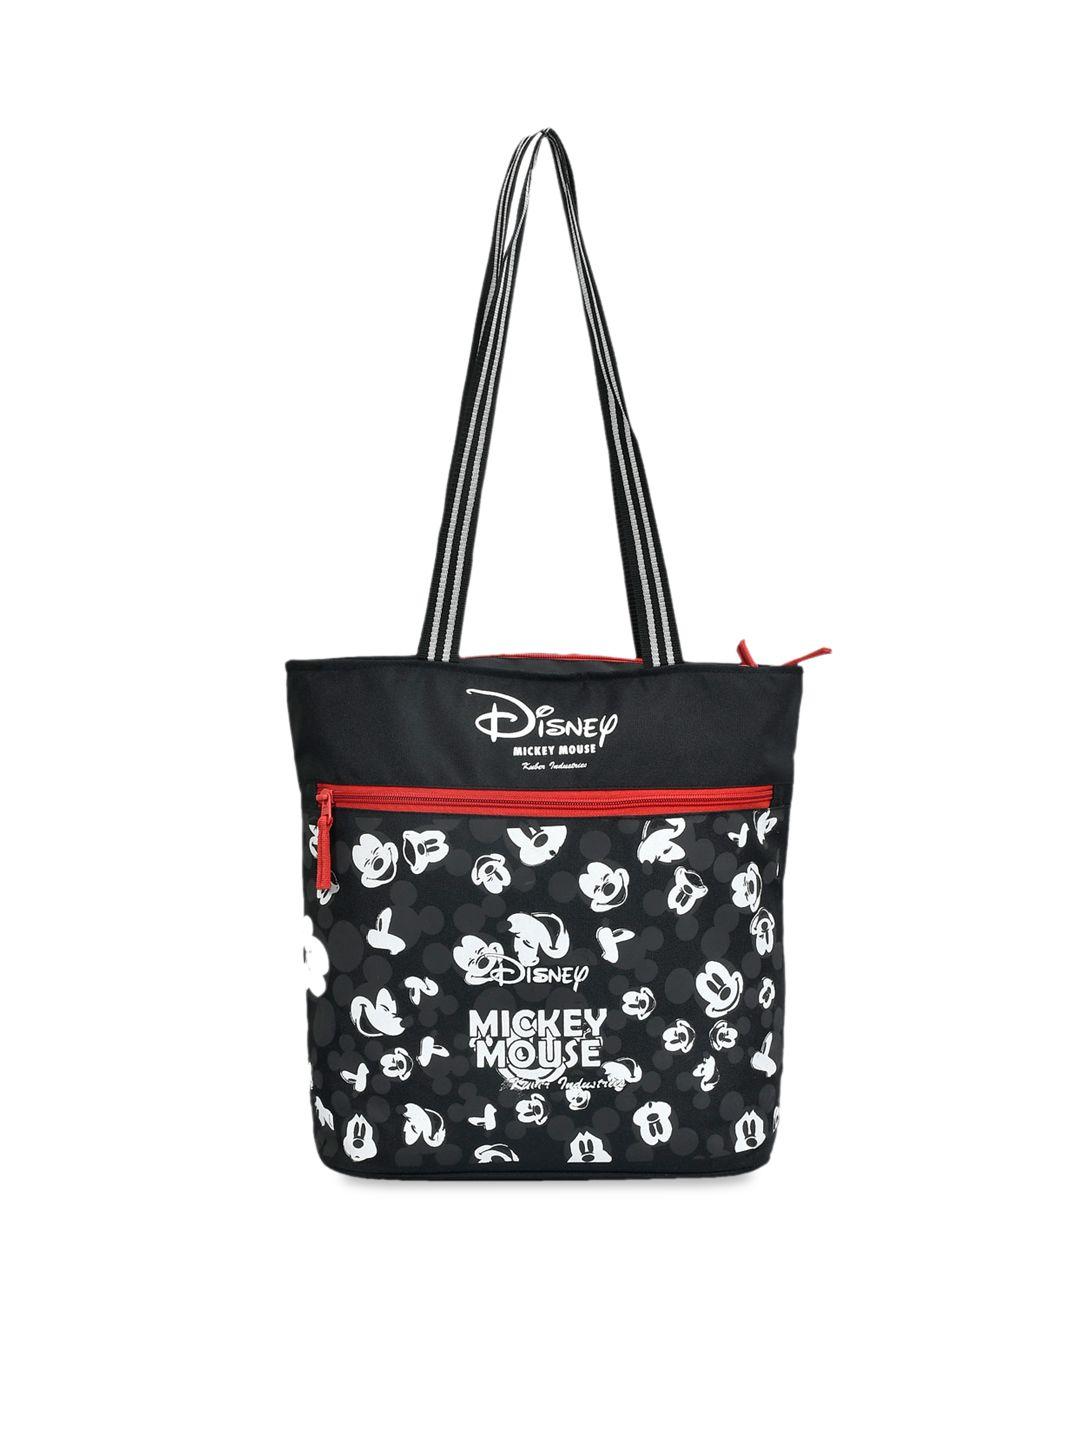 kuber industries black & white mickey mouse printed tote bag